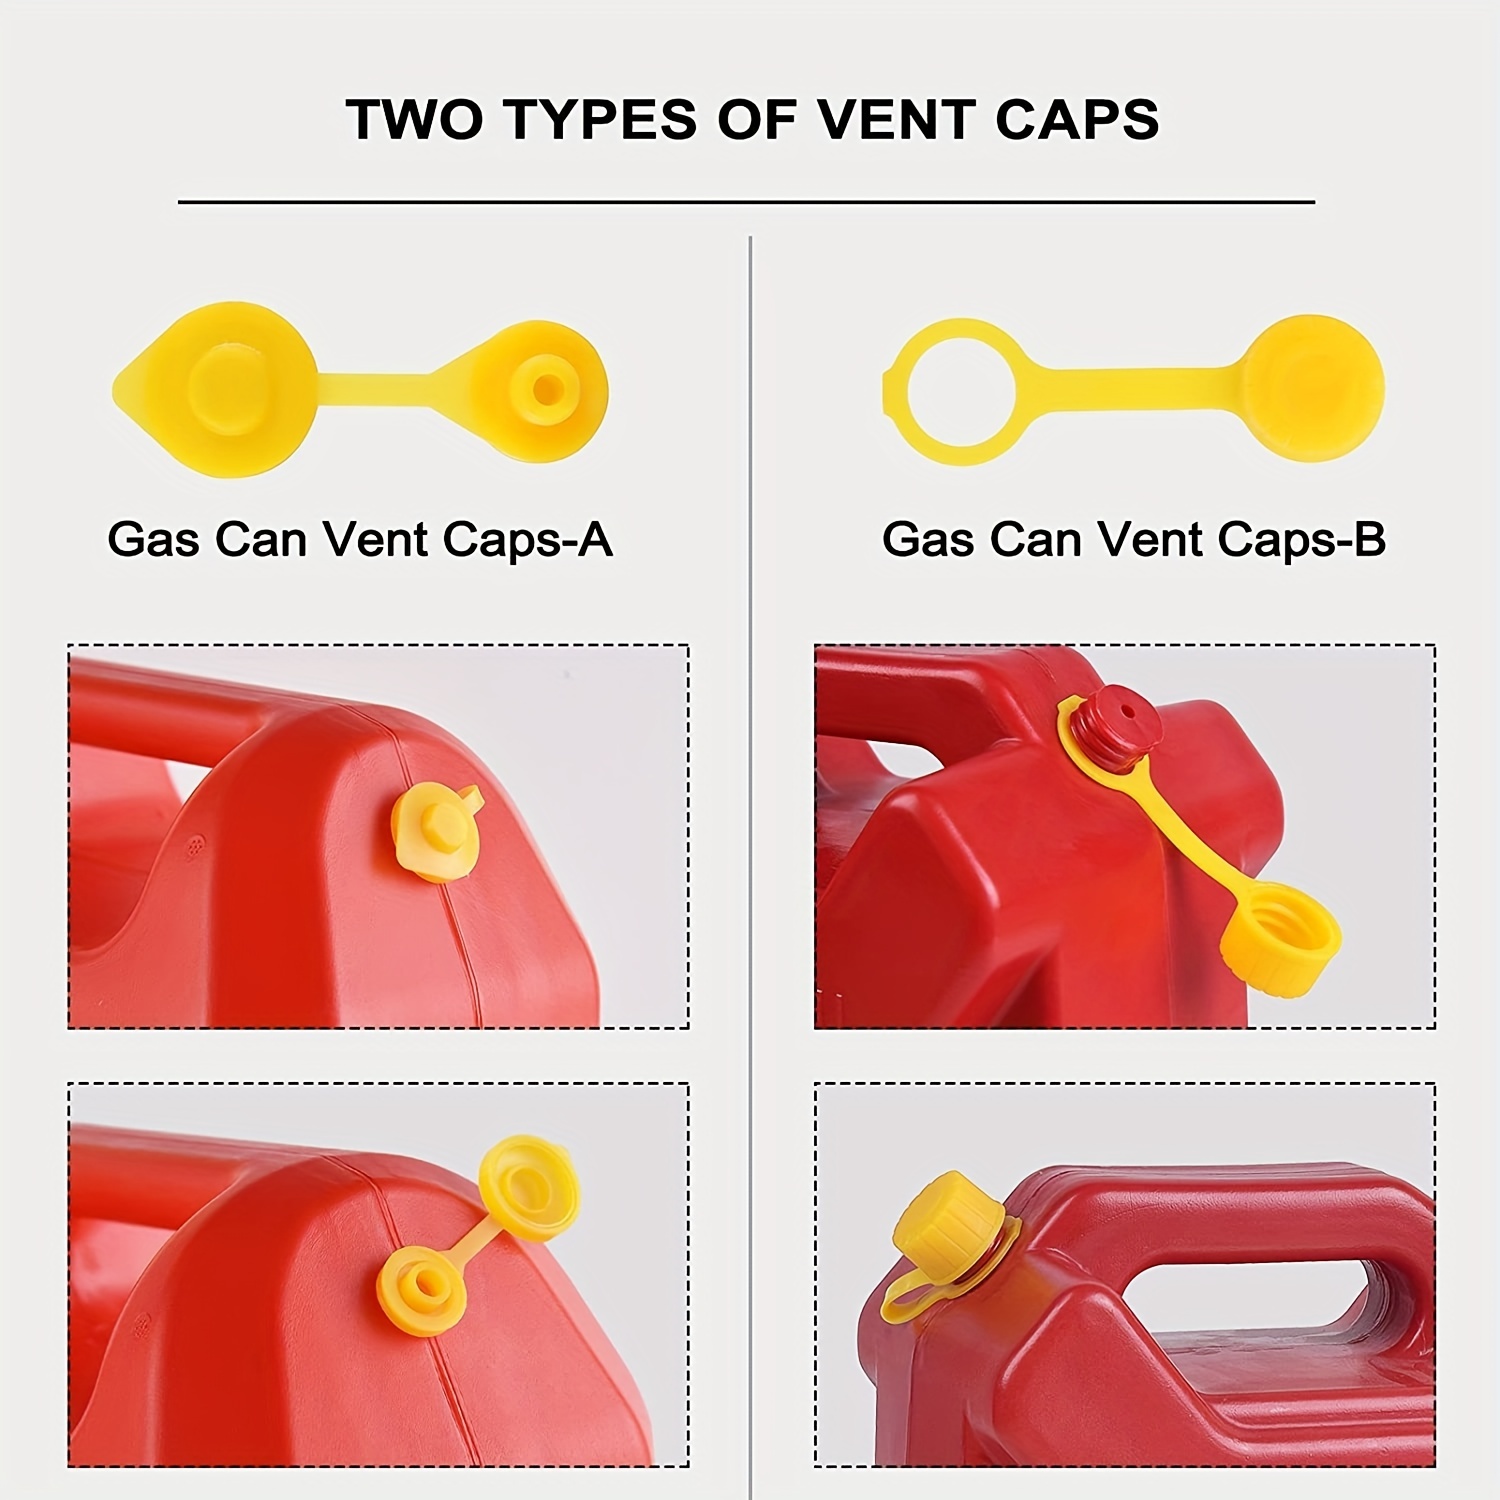 Gas Can Spout Gas Can Nozzle Suitable For Most 1/2/5/10 Gal - Temu